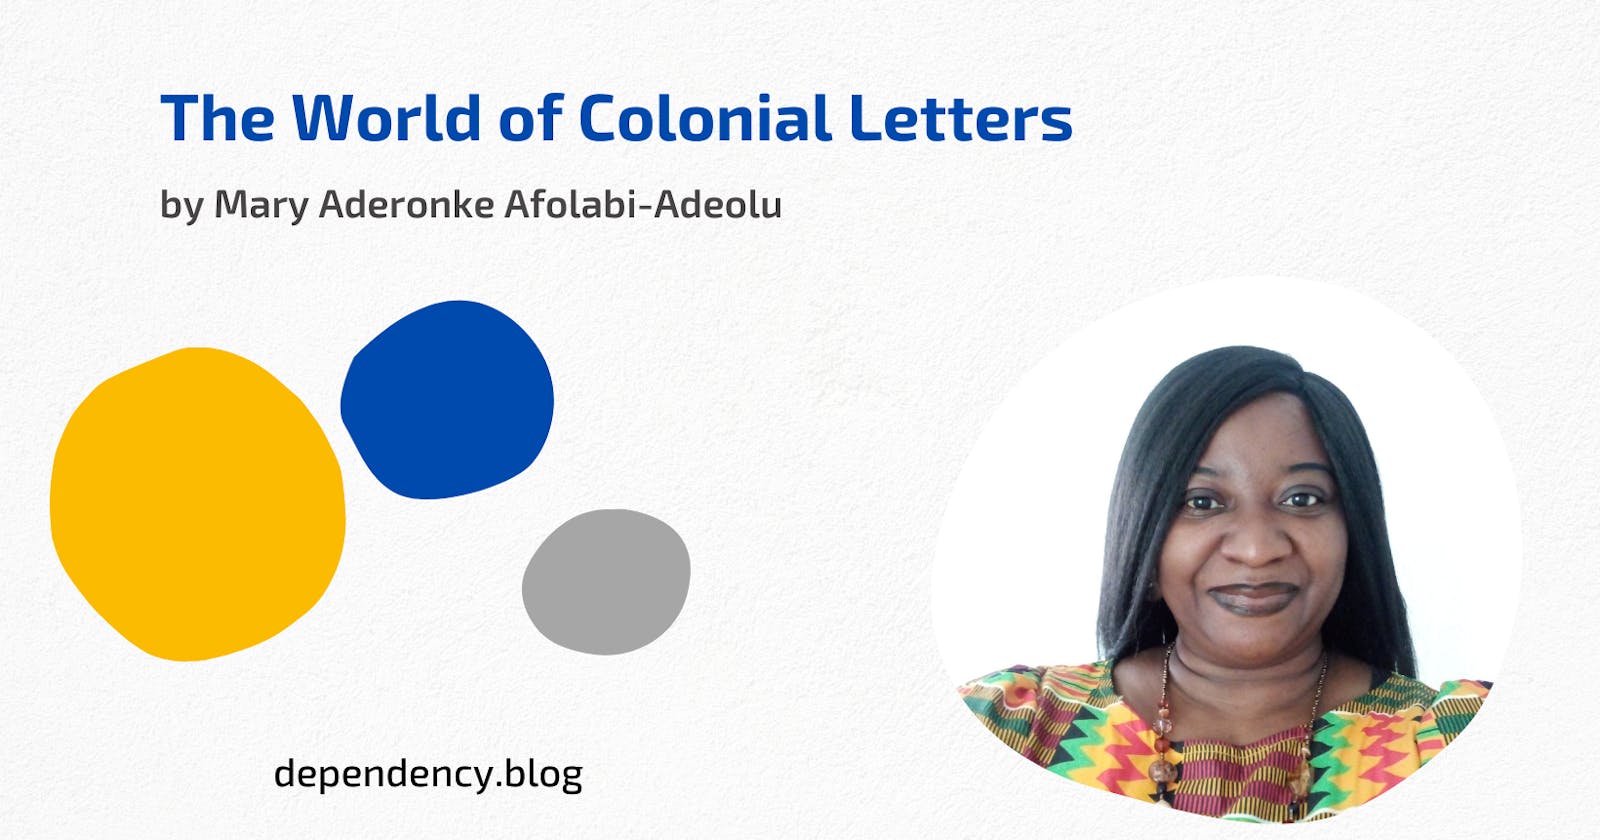 The World of Colonial Letters